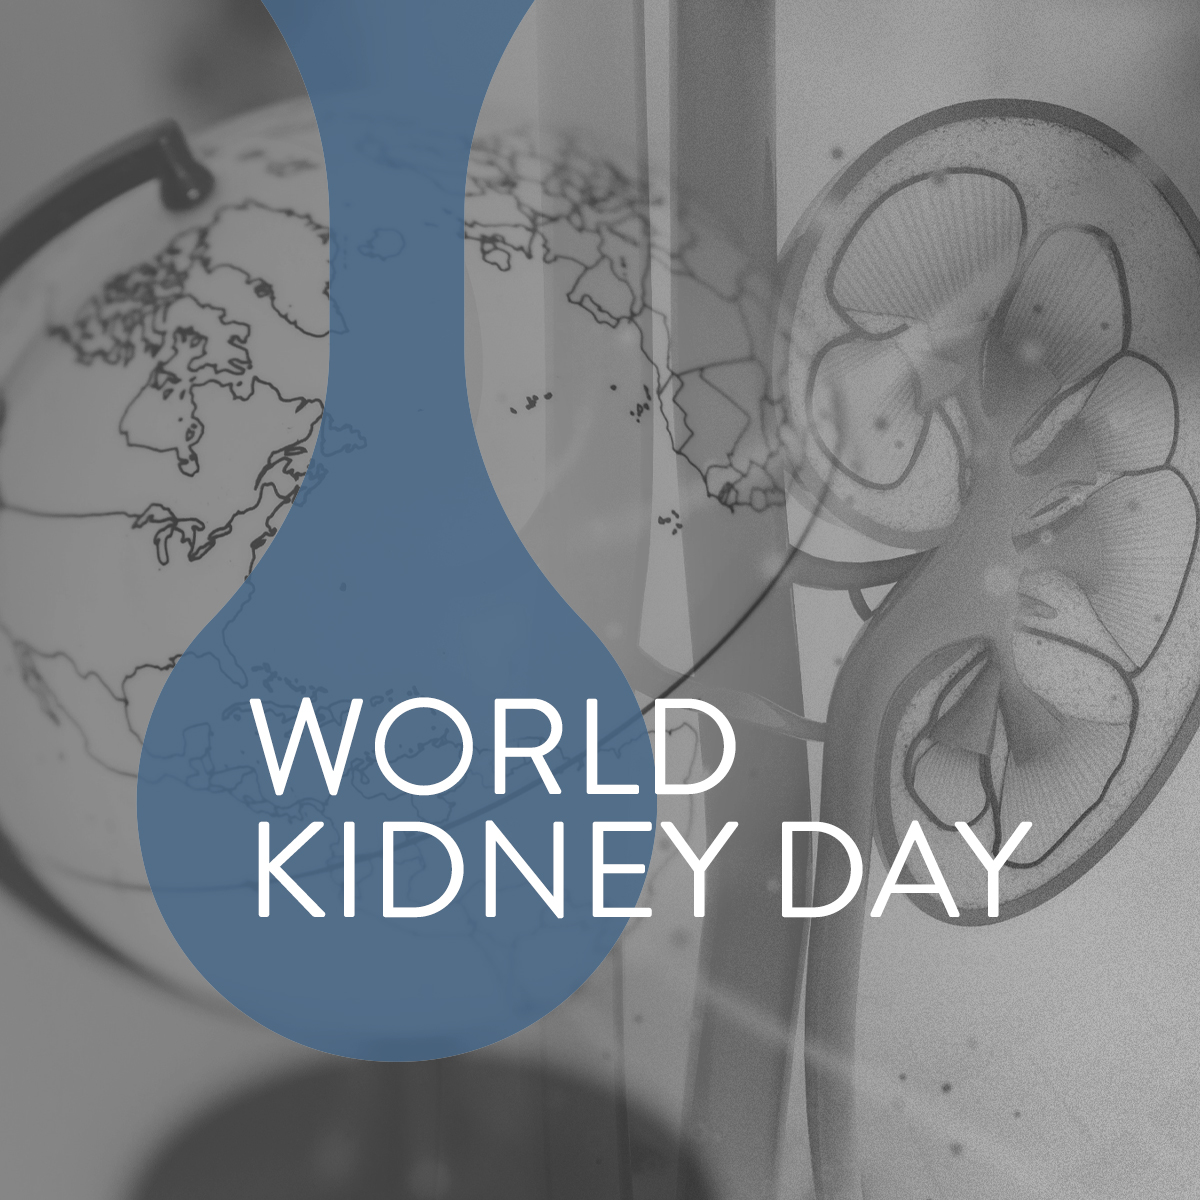 To show our support for #WorldKidneyDay2023, we invite you to join us for #RRIKidneyWalk in Central Park, NYC starting at 4:00 pm ET. Details can be found here: bit.ly/WKD-2023
#WorldKidneyDay #NationalKidneyMonth #ShowYourKidneys #KidneyHealthForAll